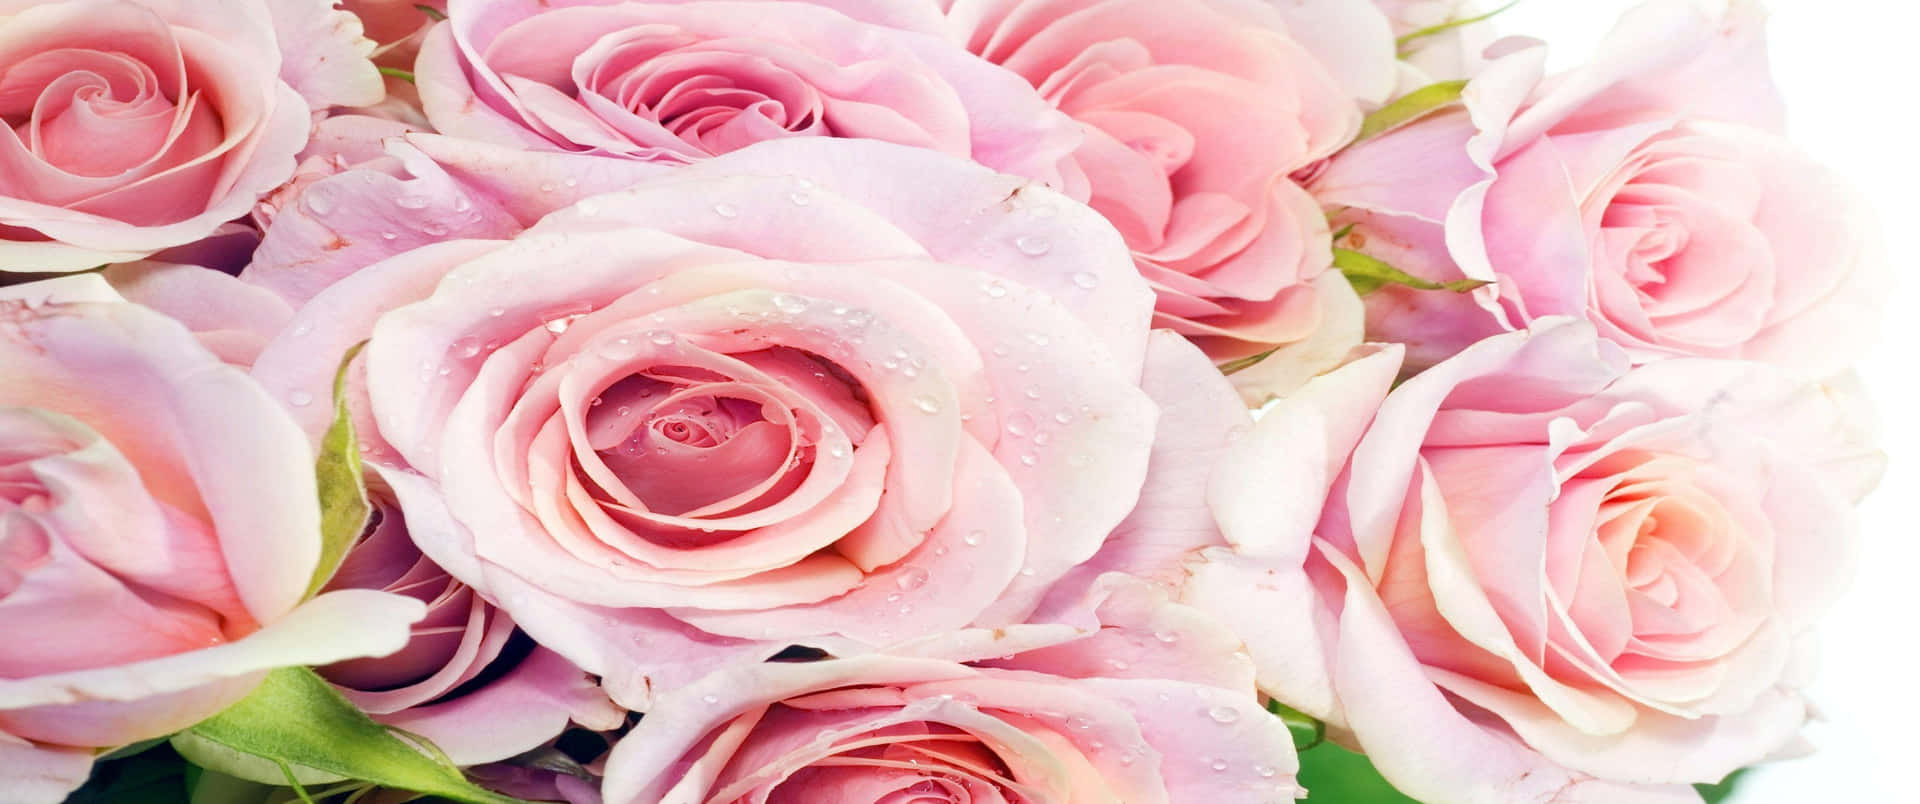 Pink Roses In A Vase On A White Background